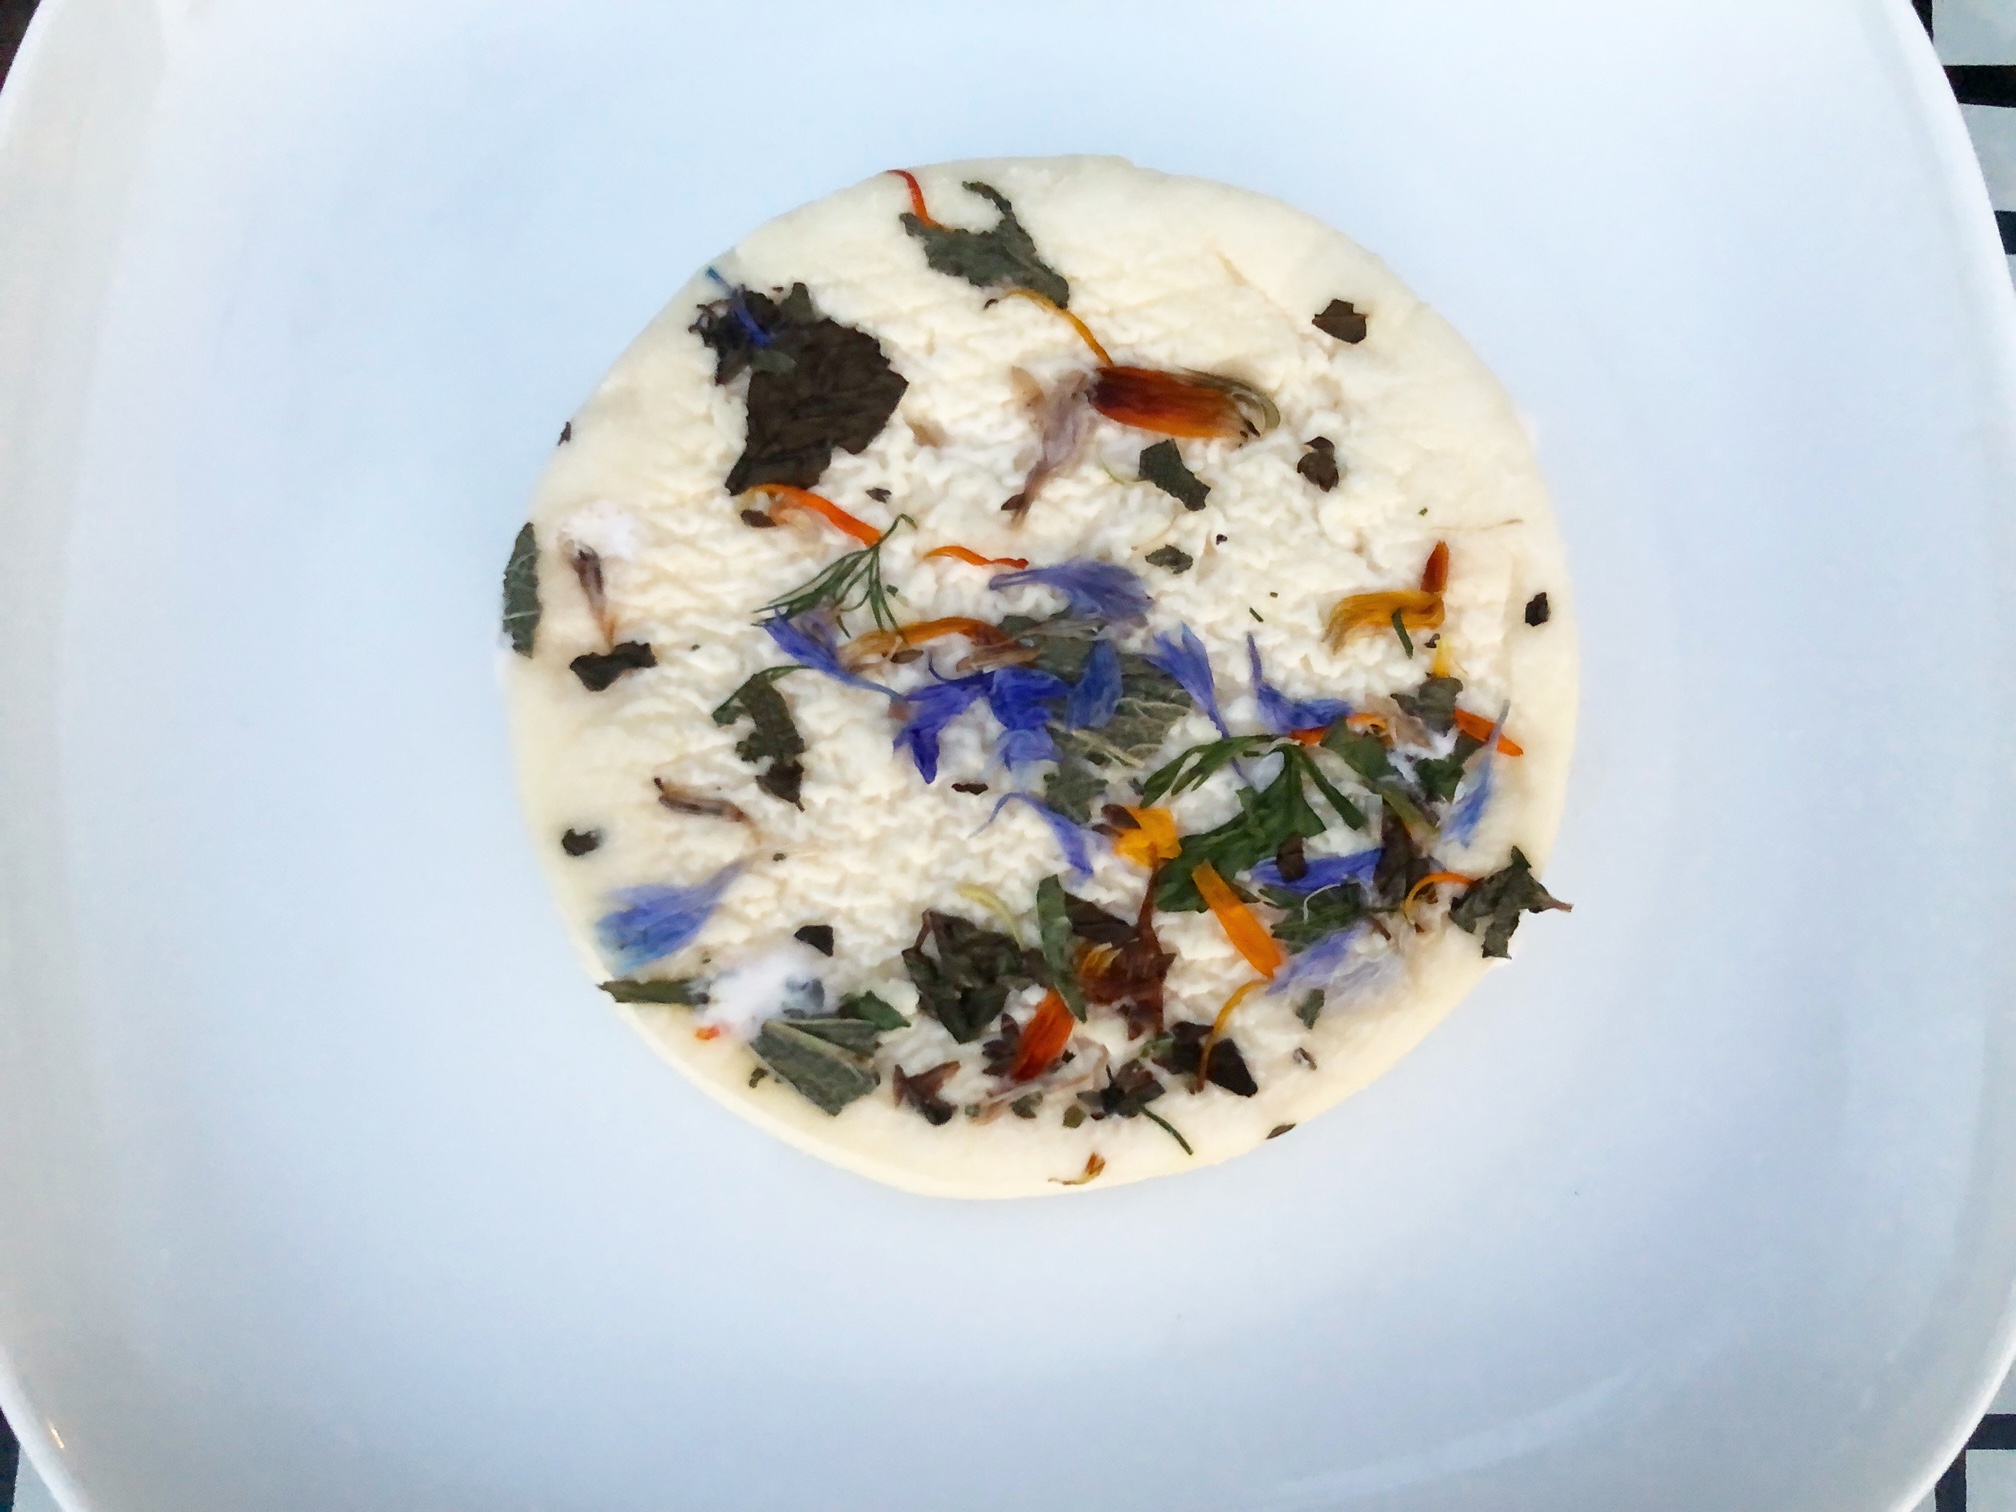 On a white plate, a bloomy rinded cheese is adorned with edible flowers. Photo by Alyssa Buckley.